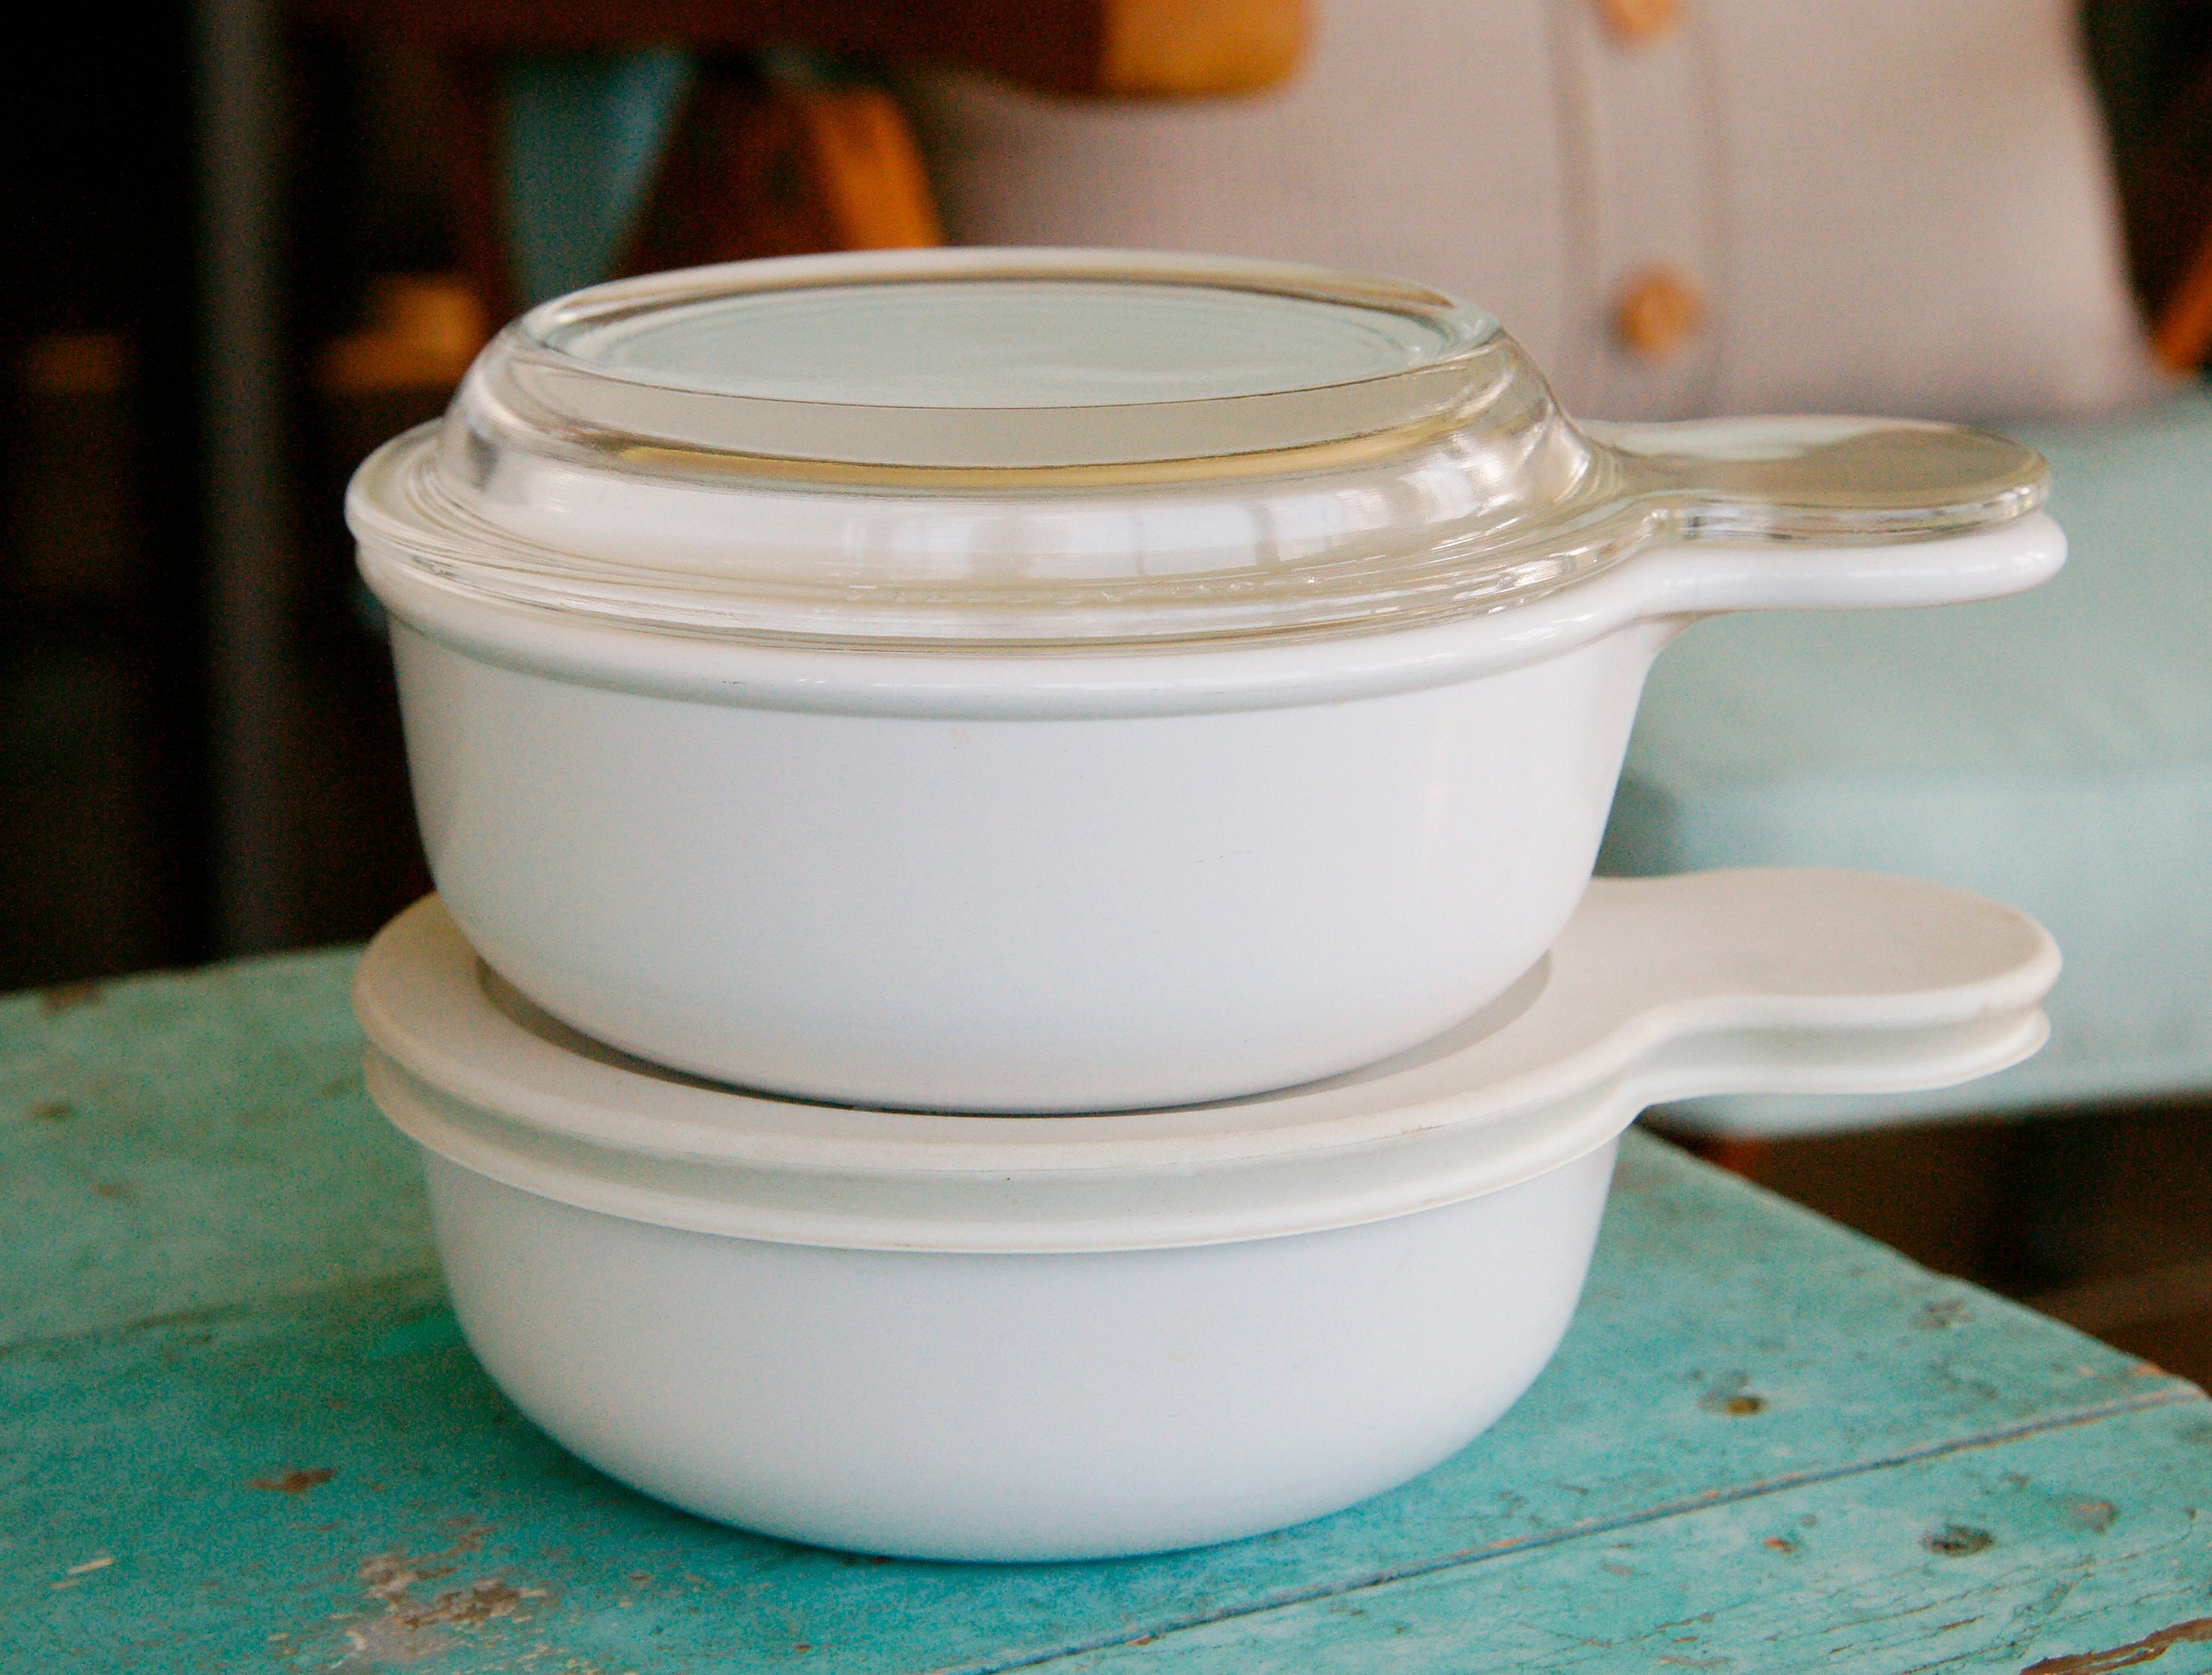 Vintage Corning Ware White Grab It Bowls Heat and Eat Dishes Bakeware  Cookware P 150 B 550 Ml Set of 2 With Lids 